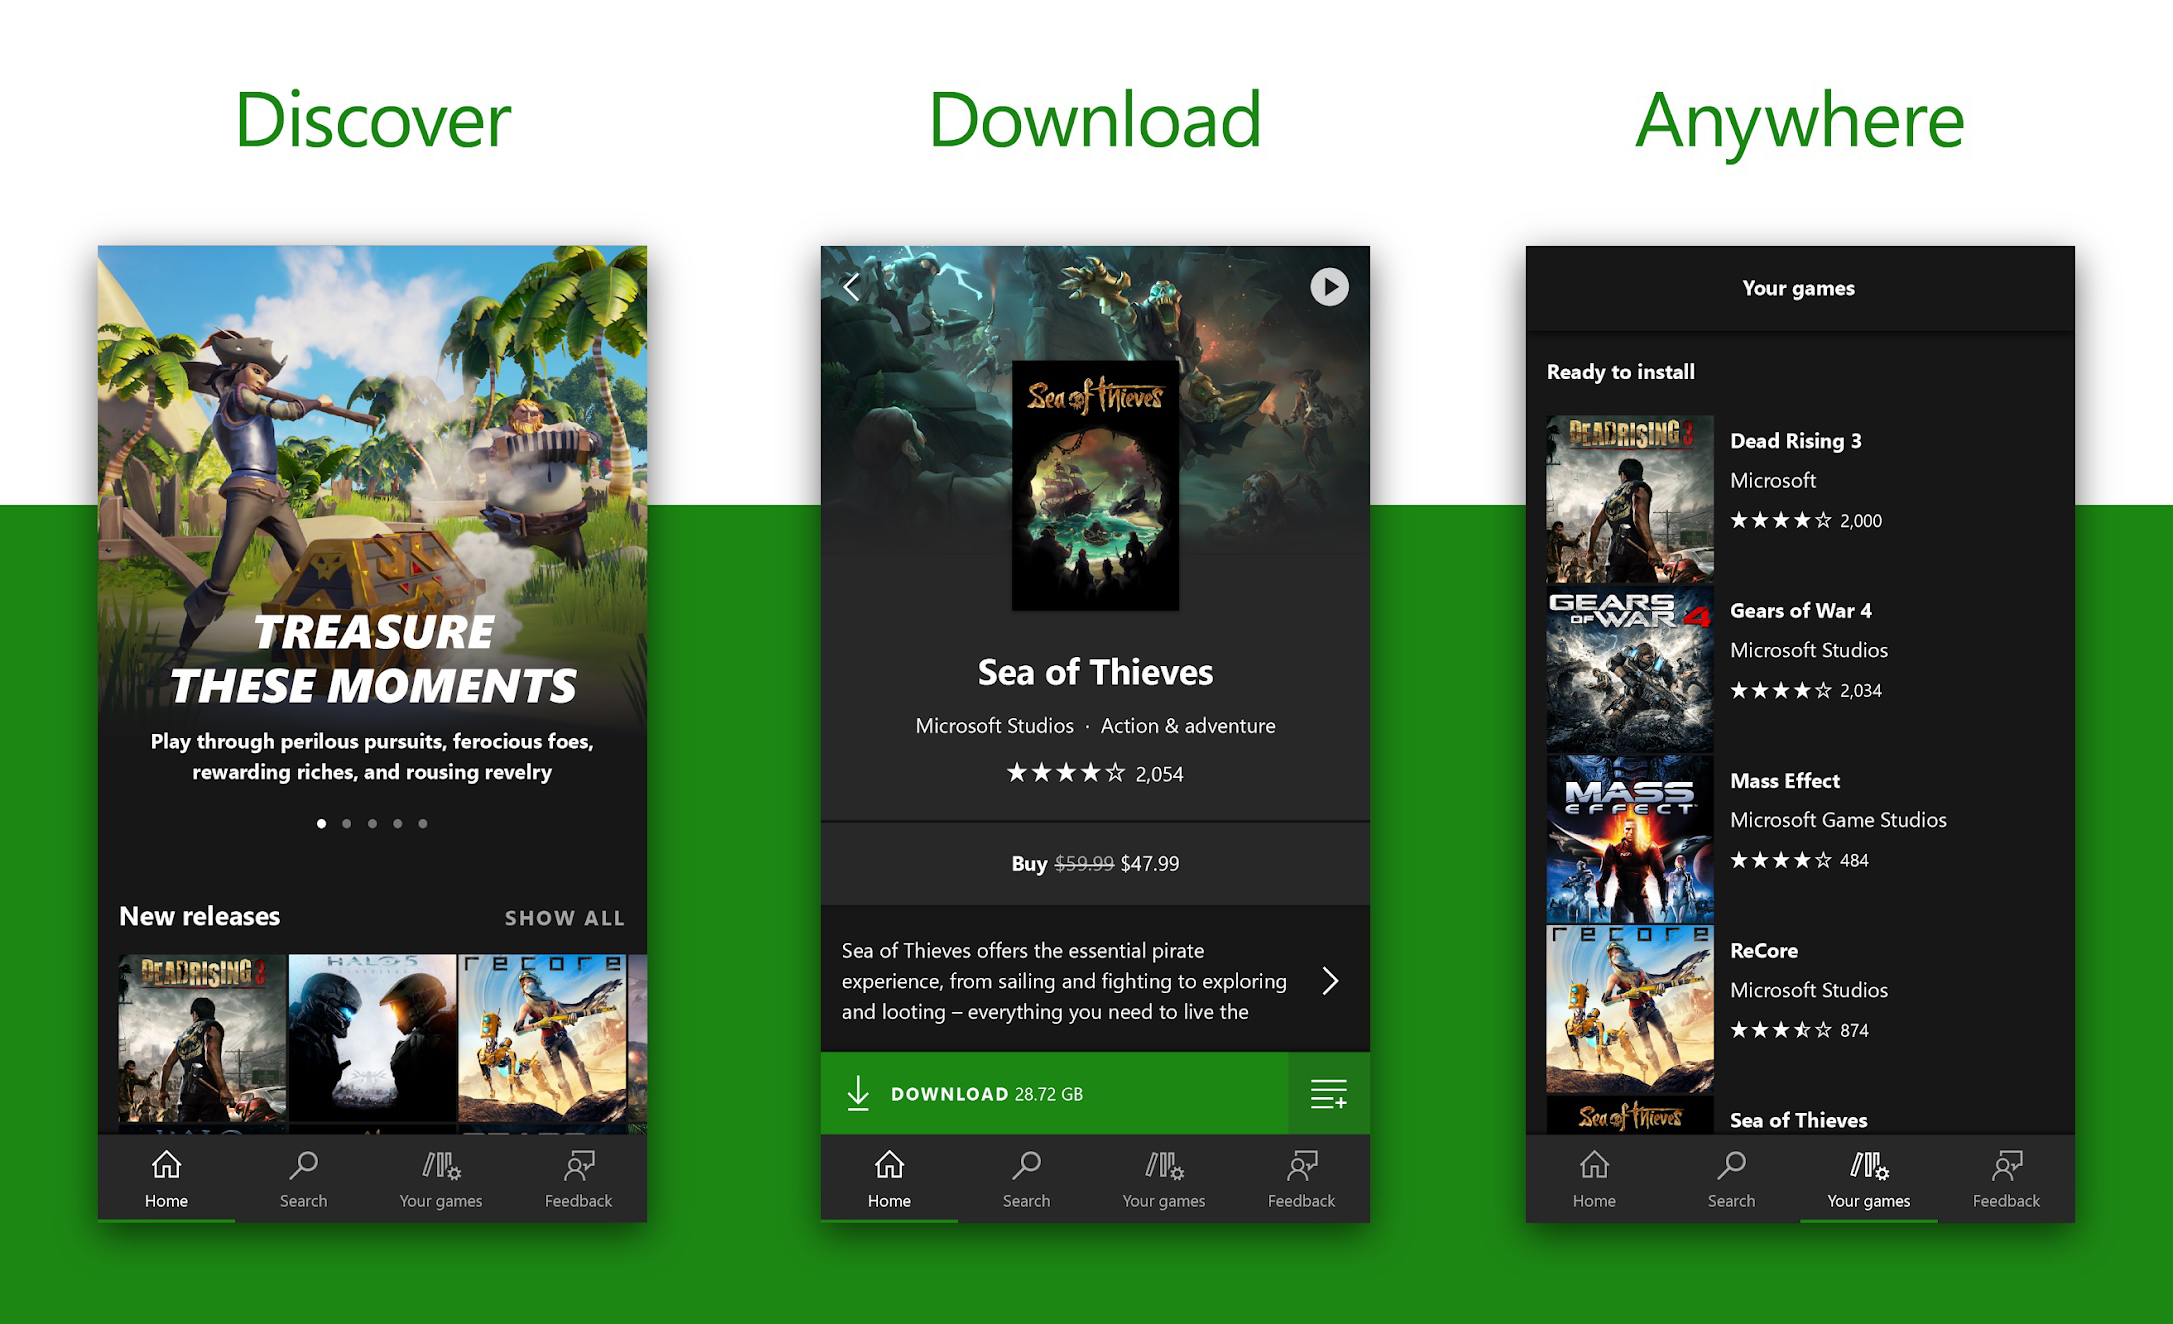 Download Xbox One with new Game Pass app